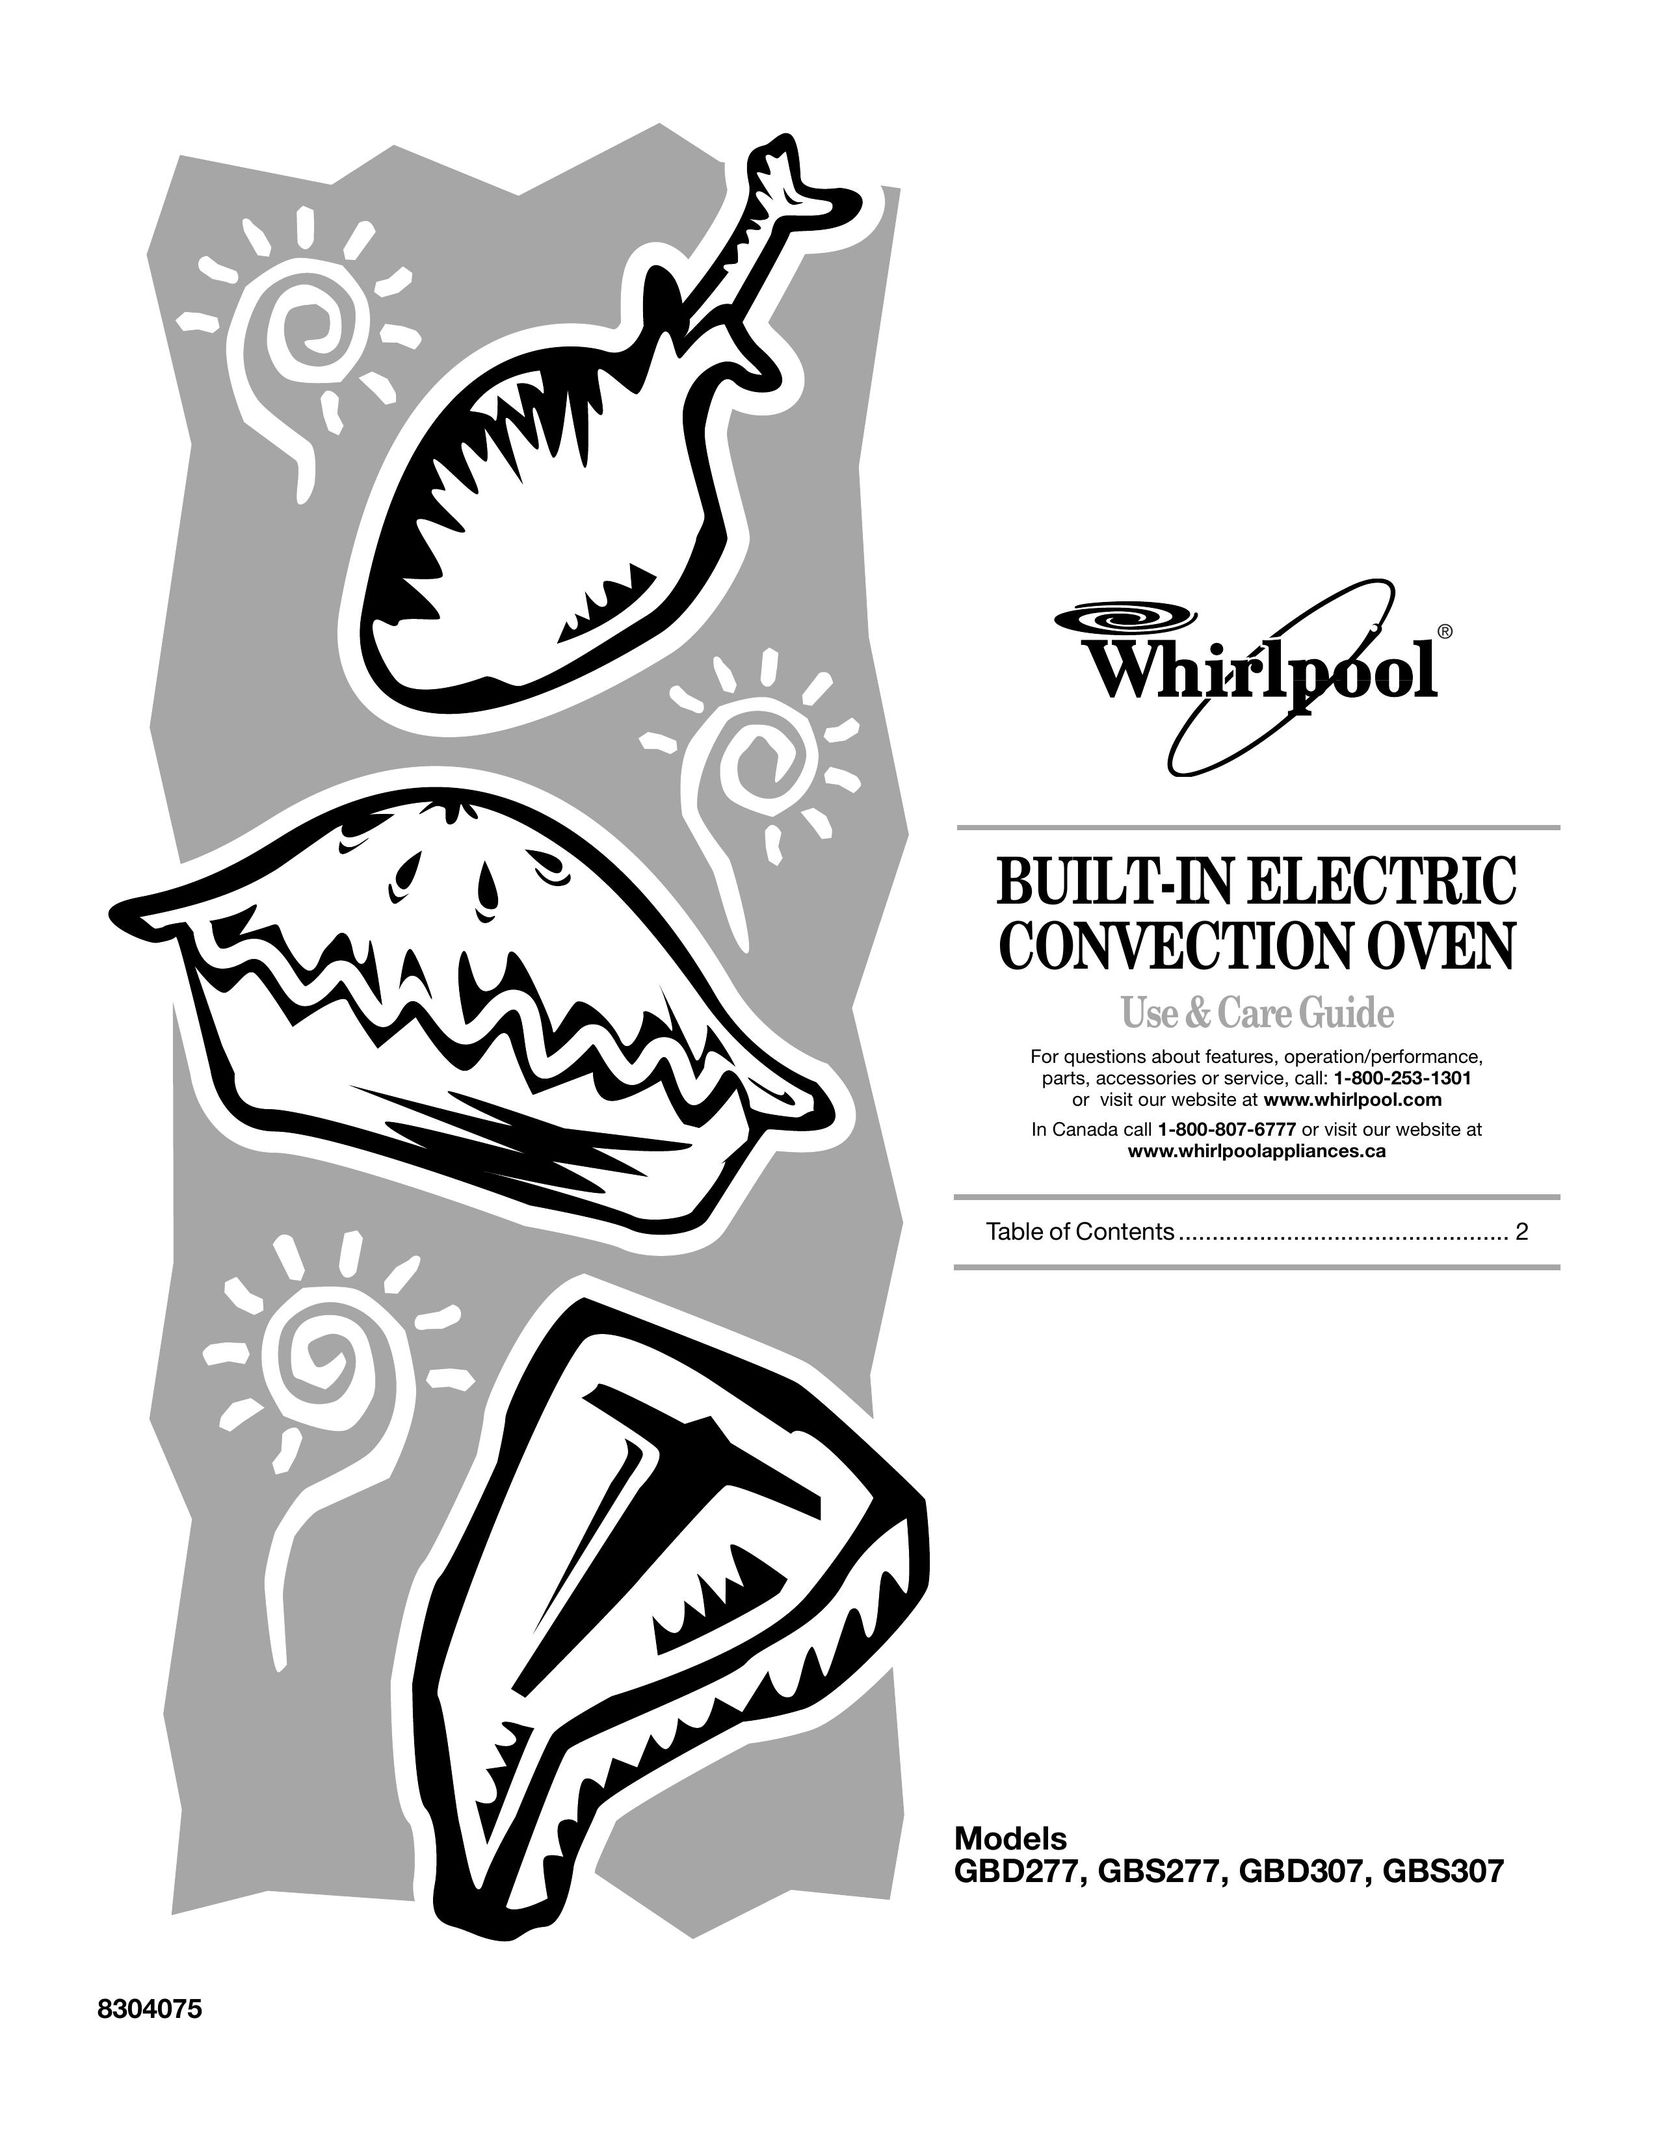 Whirlpool GBS307 Convection Oven User Manual